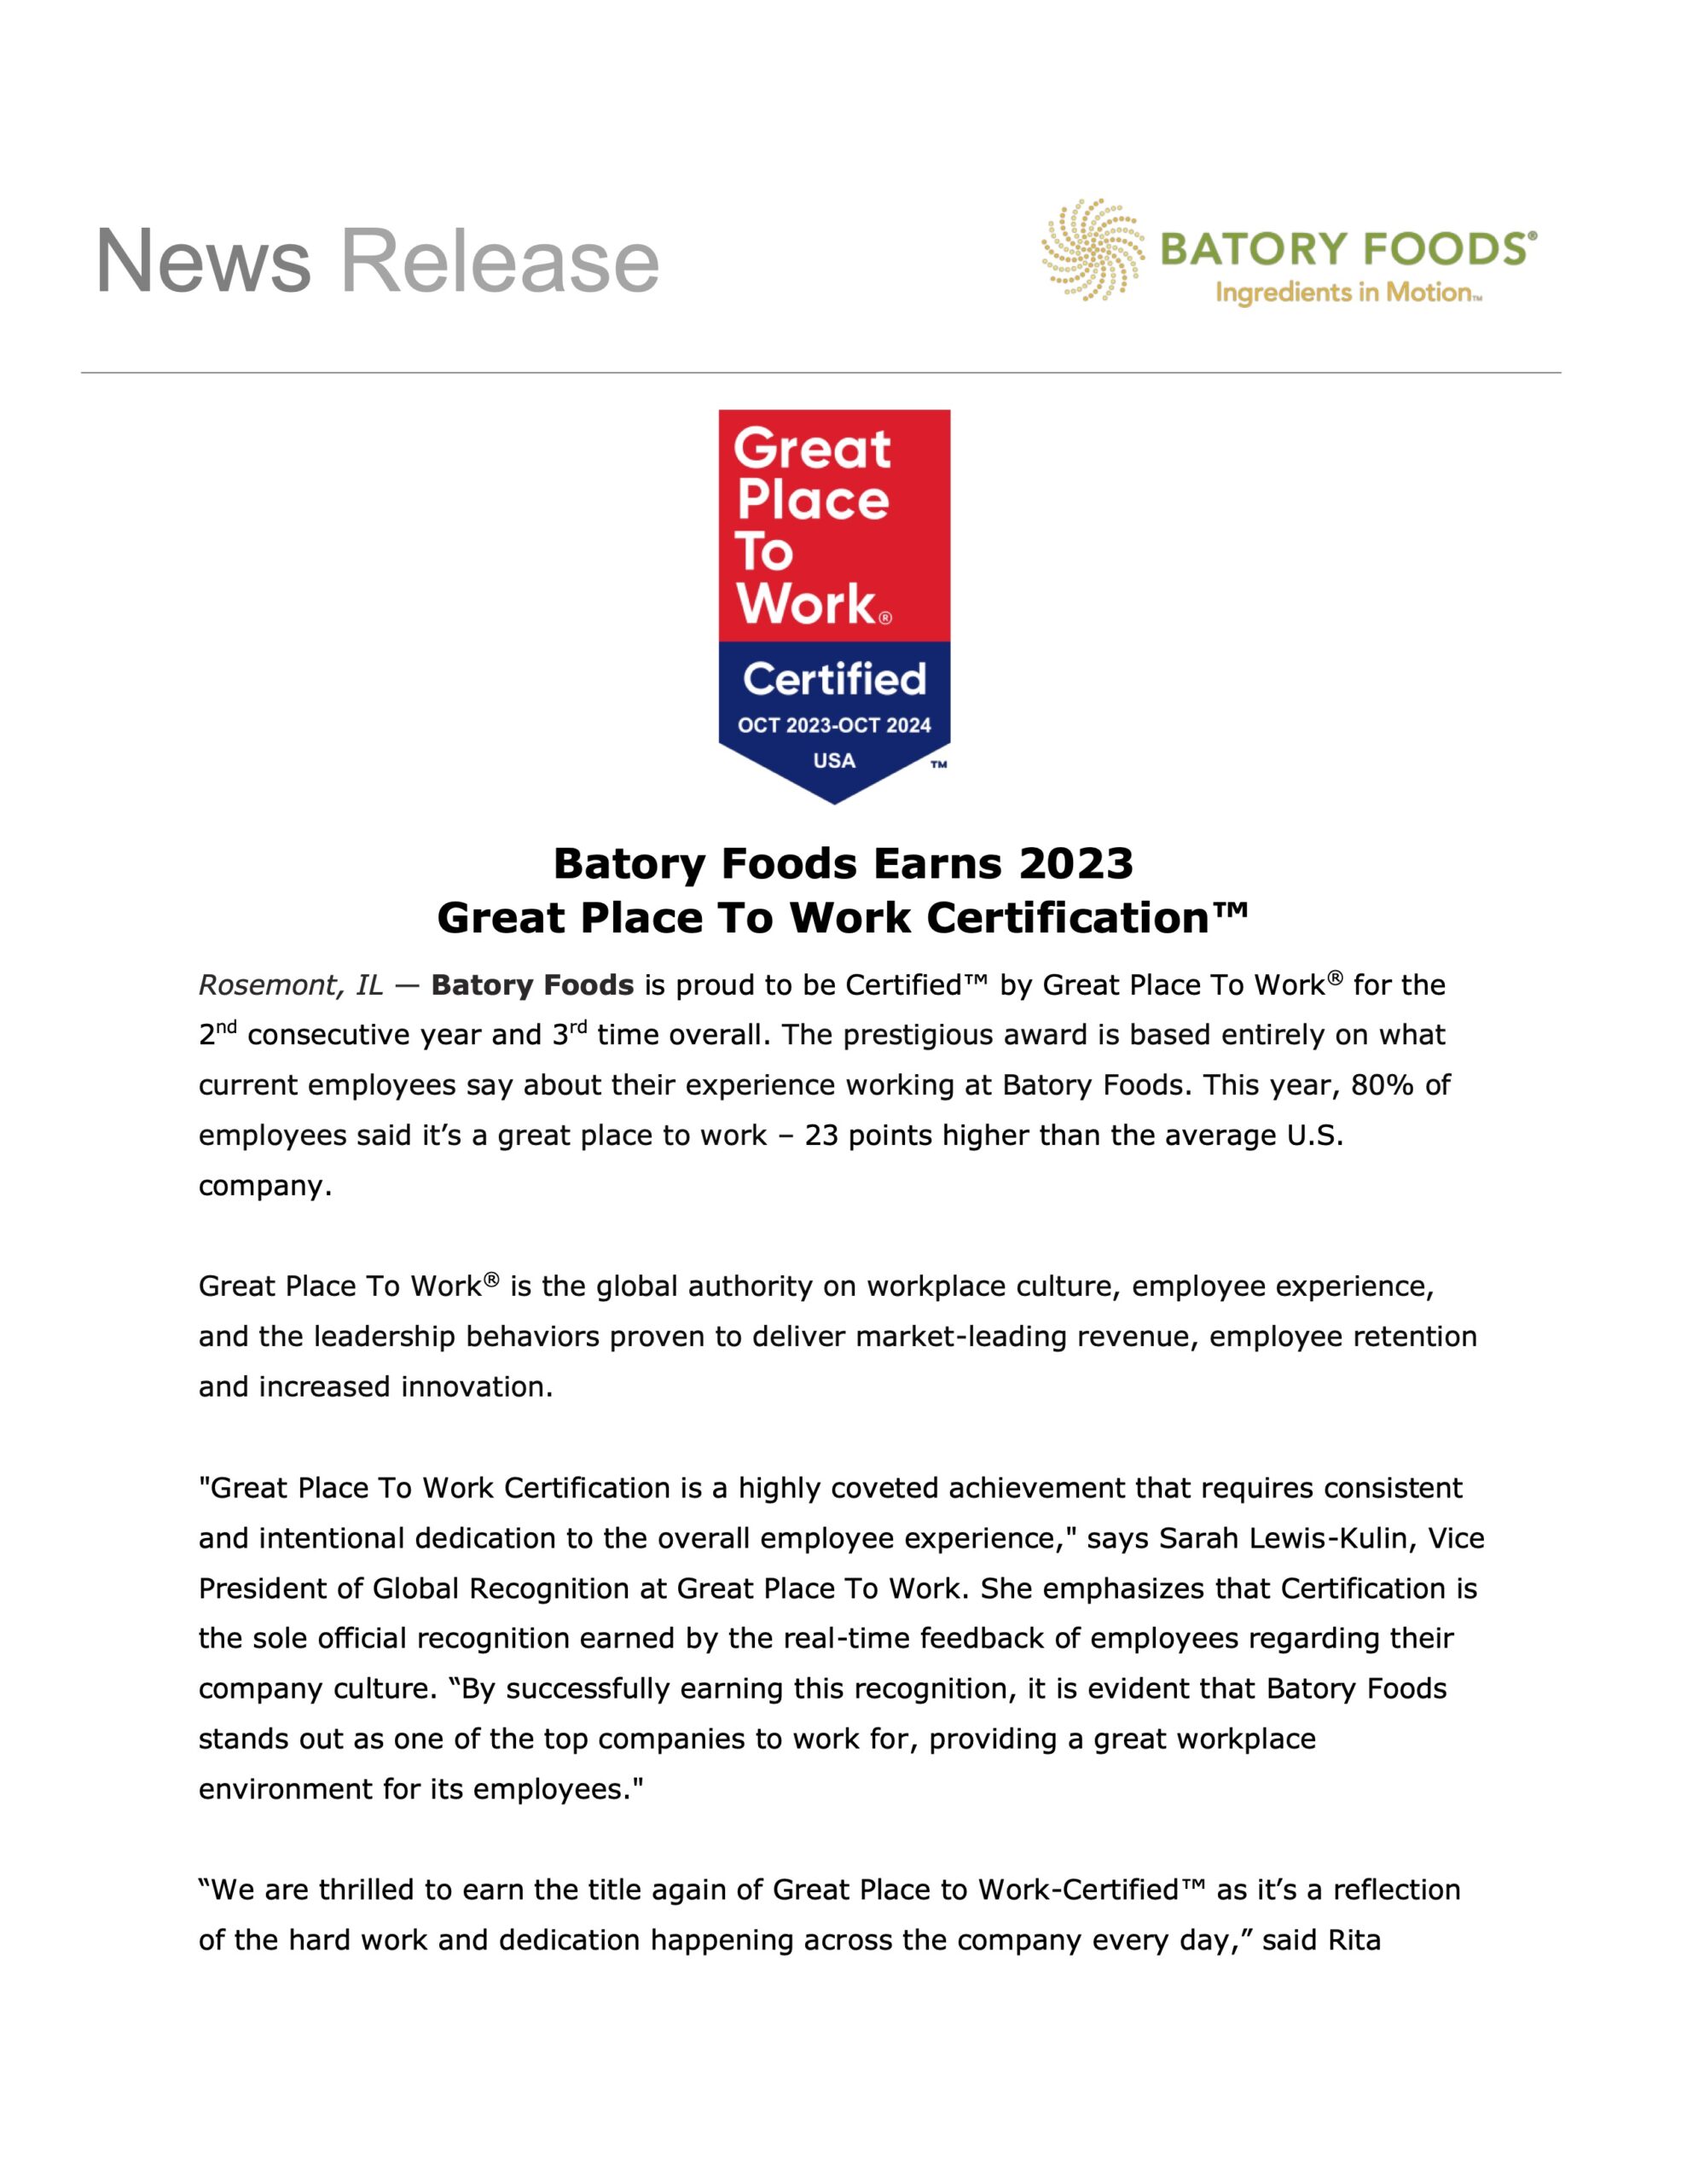 Batory Foods Earns 2023 Great Place To Work Certification™